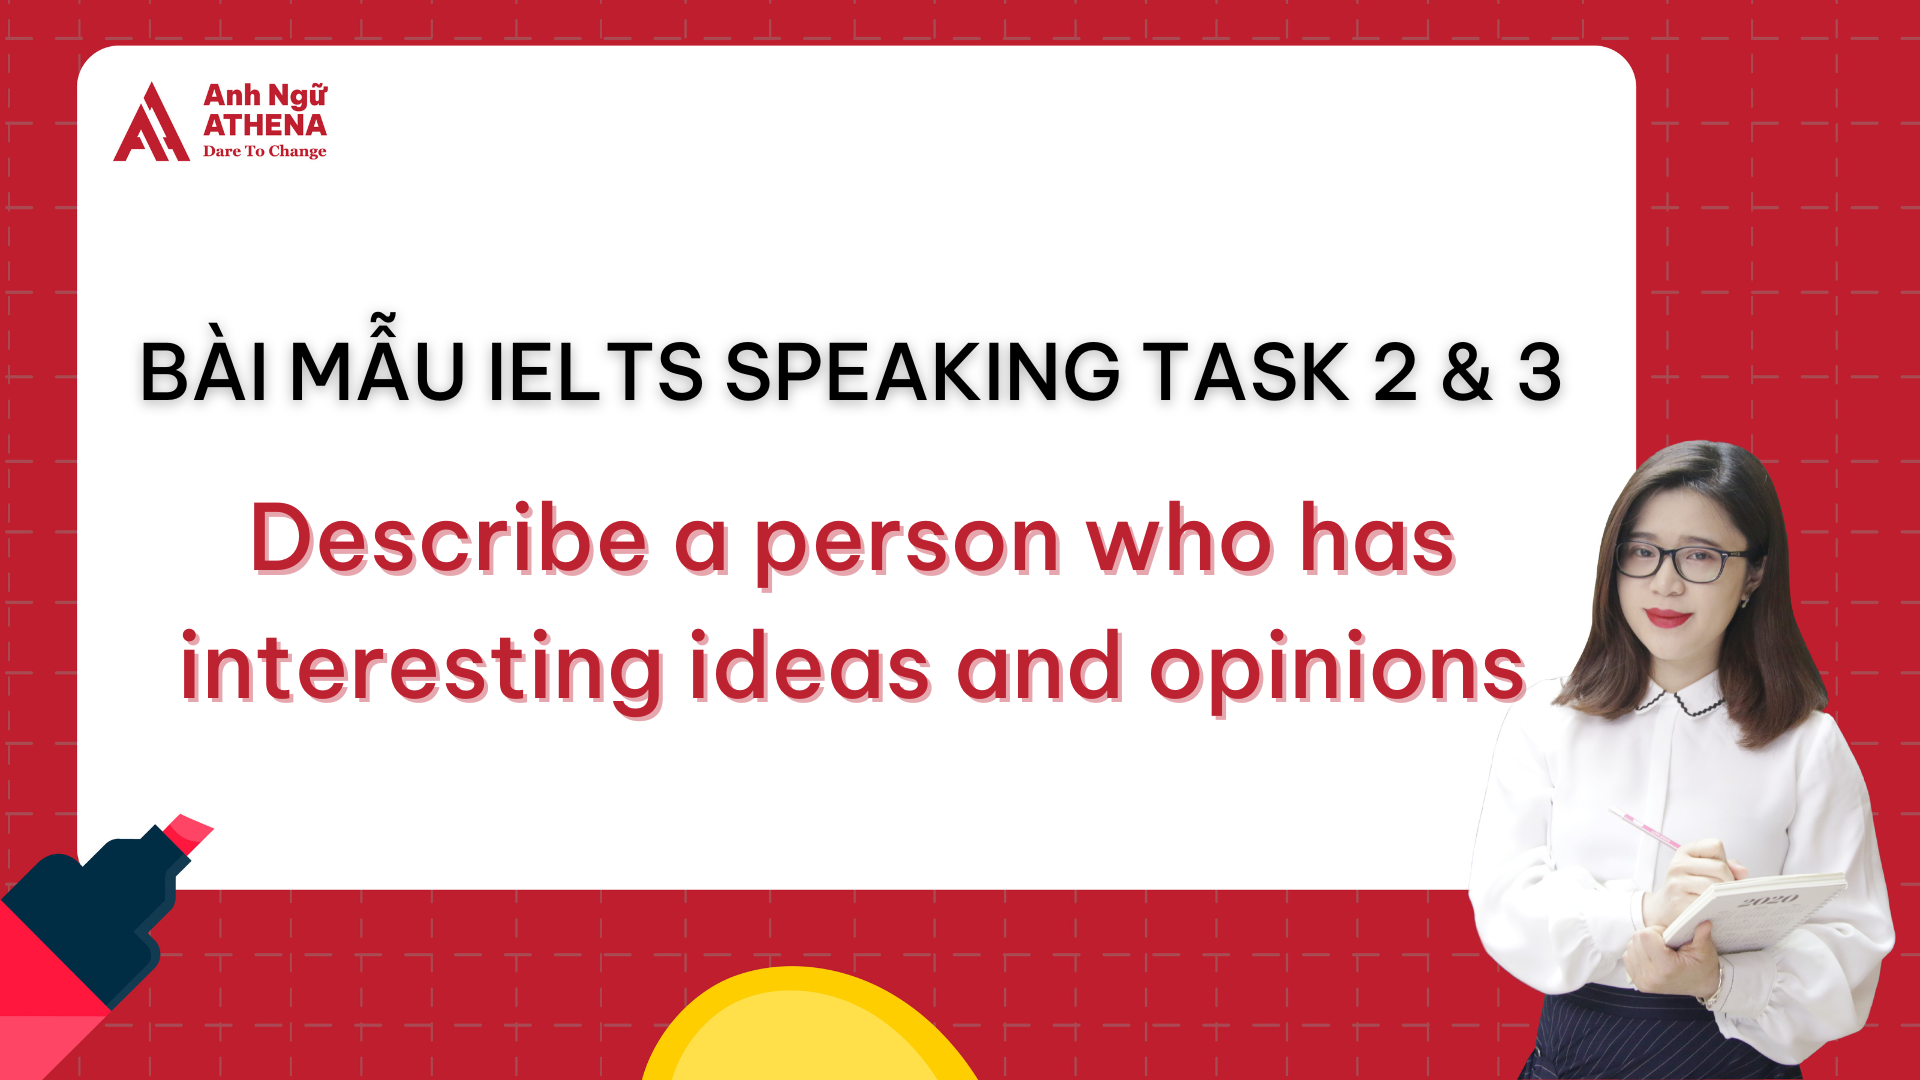 Bài mẫu IELTS Speaking Part 2 & 3 - Topic: Describe a person who has interesting ideas and opinions